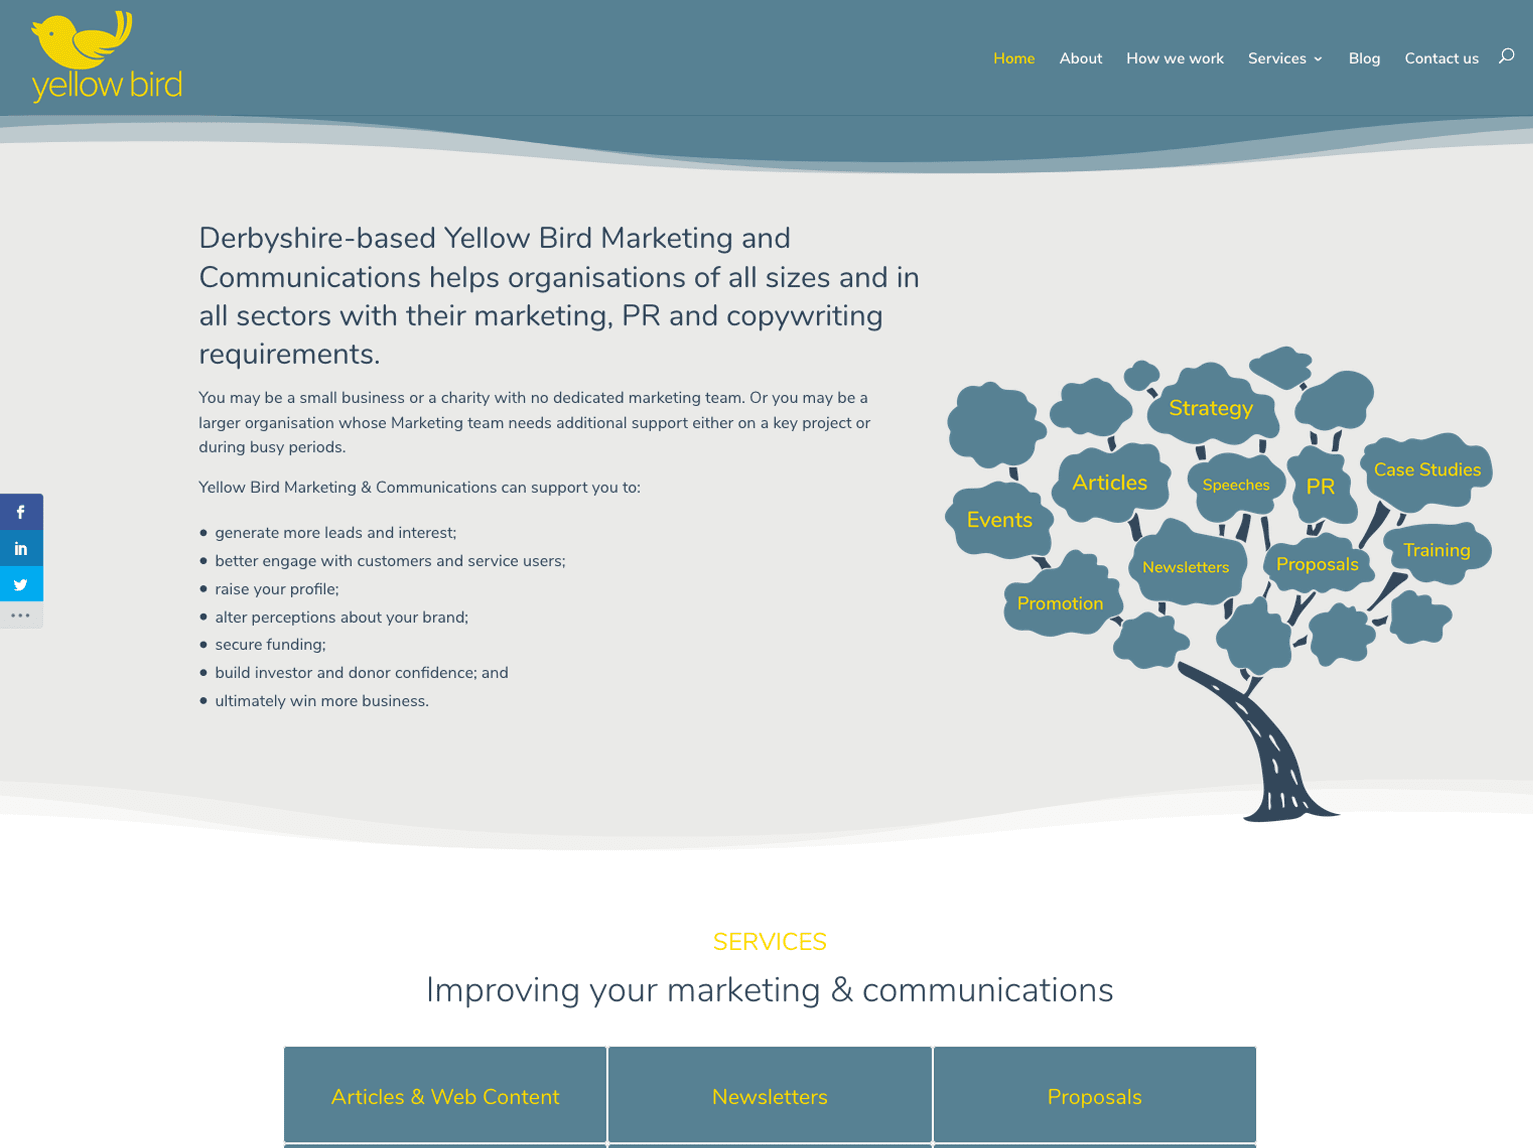 Yellow Bird Marketing and Communications Home Page